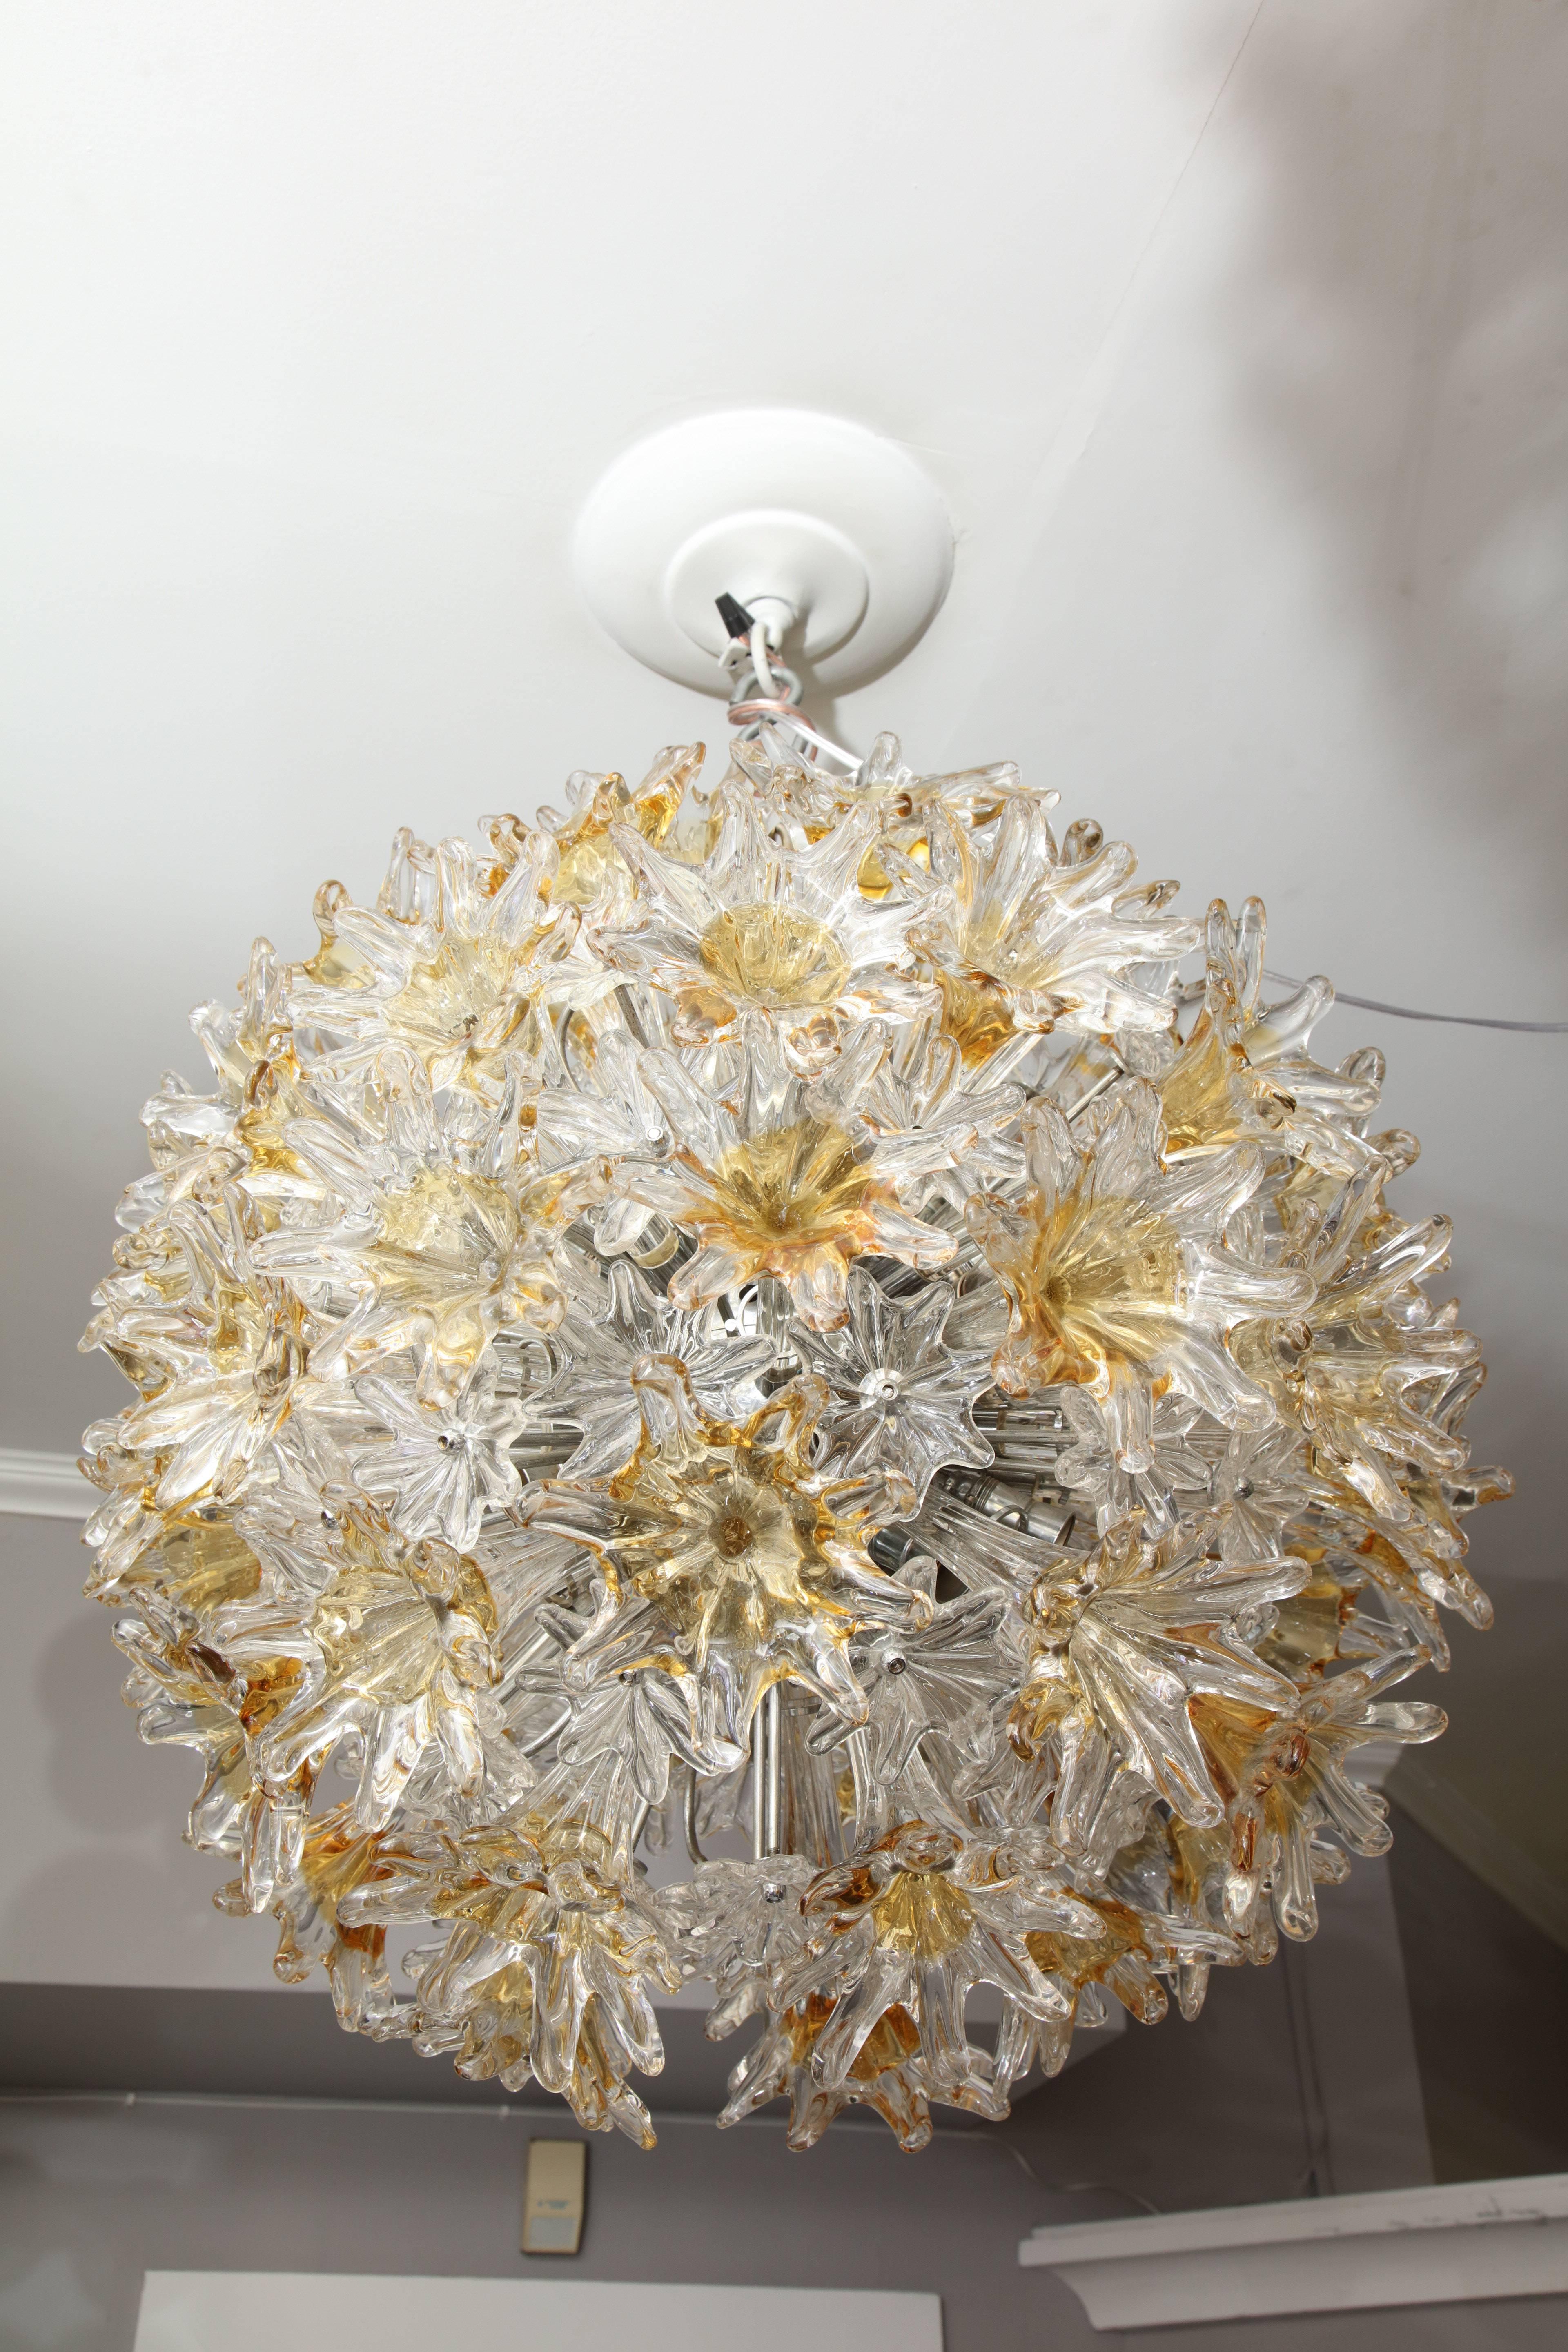 Spectacular vintage Venini Esprit Sputnik Chandelier. It is a one of a kind chandelier with floral shaped glass in clear and amber colors. 